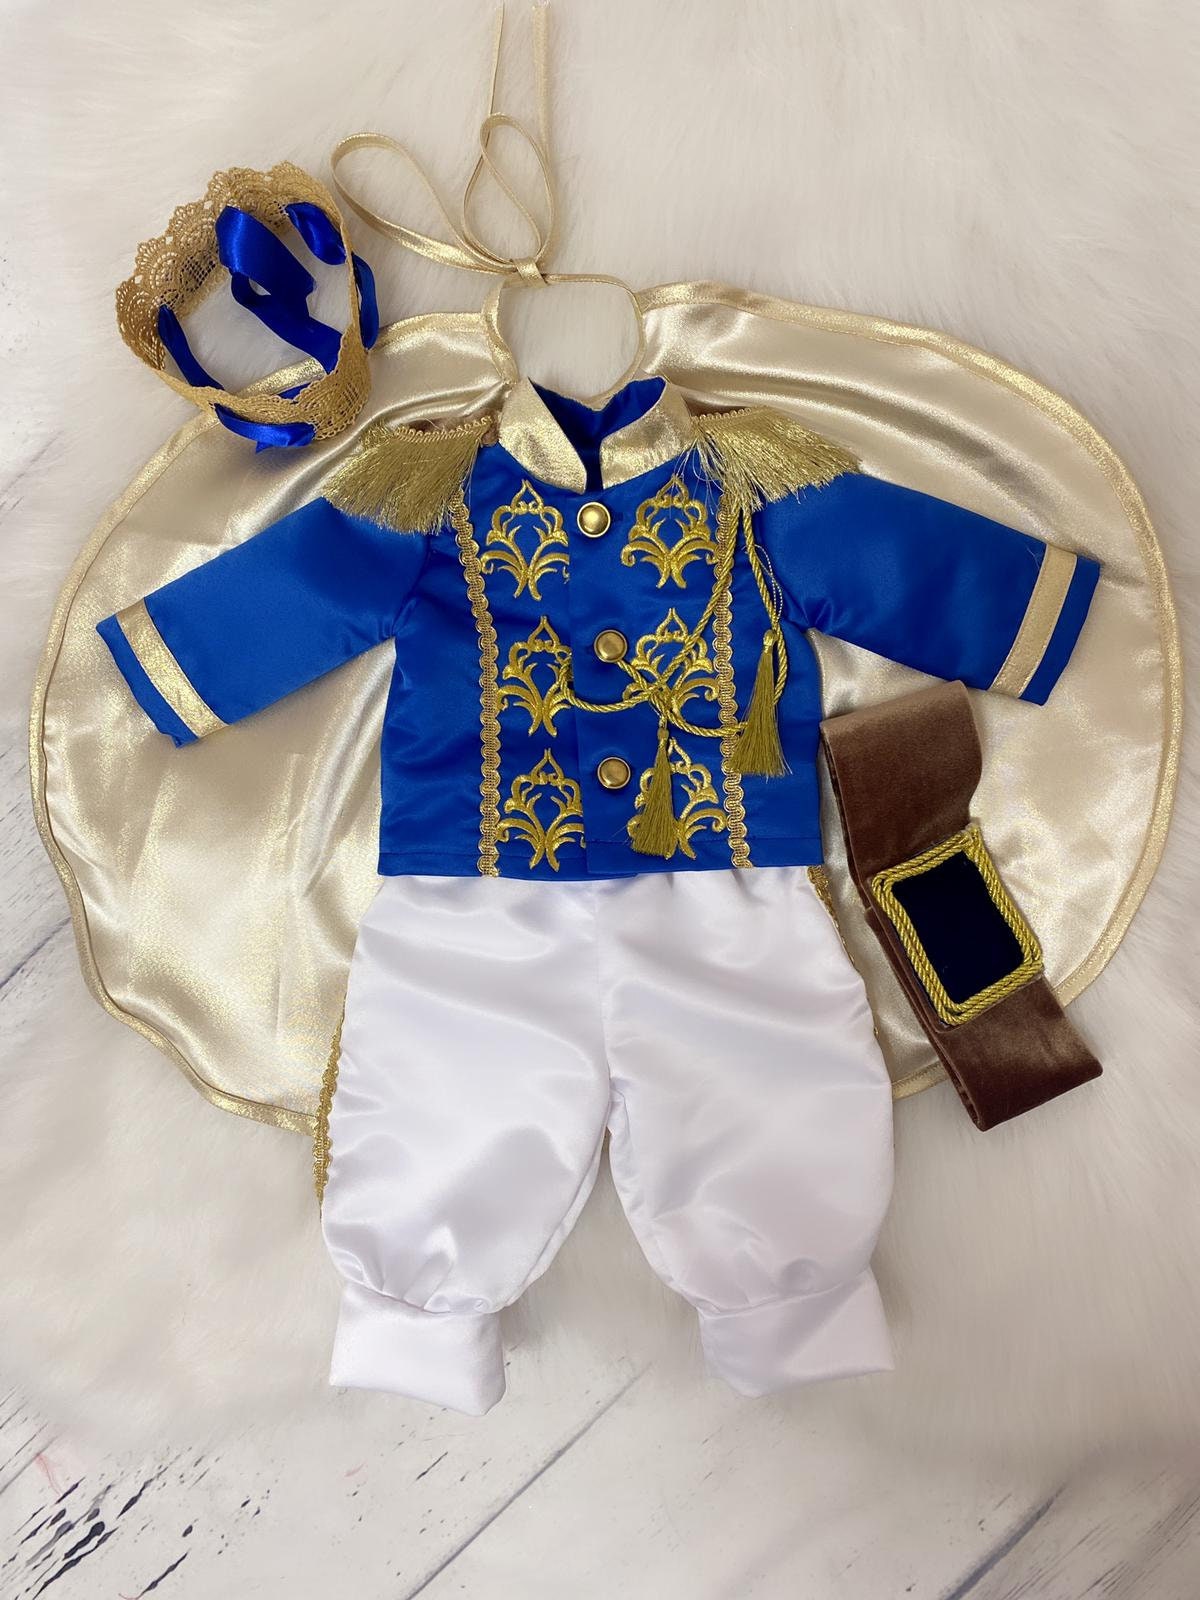 Prince Charming Costume, First Birthday Outfit Boy, Costume Party, King  Costume for Baby, First Birthday, Royal Prince Outfit - Etsy | Disfraces de  princesas, Traje de principe, Trajes de disfraces